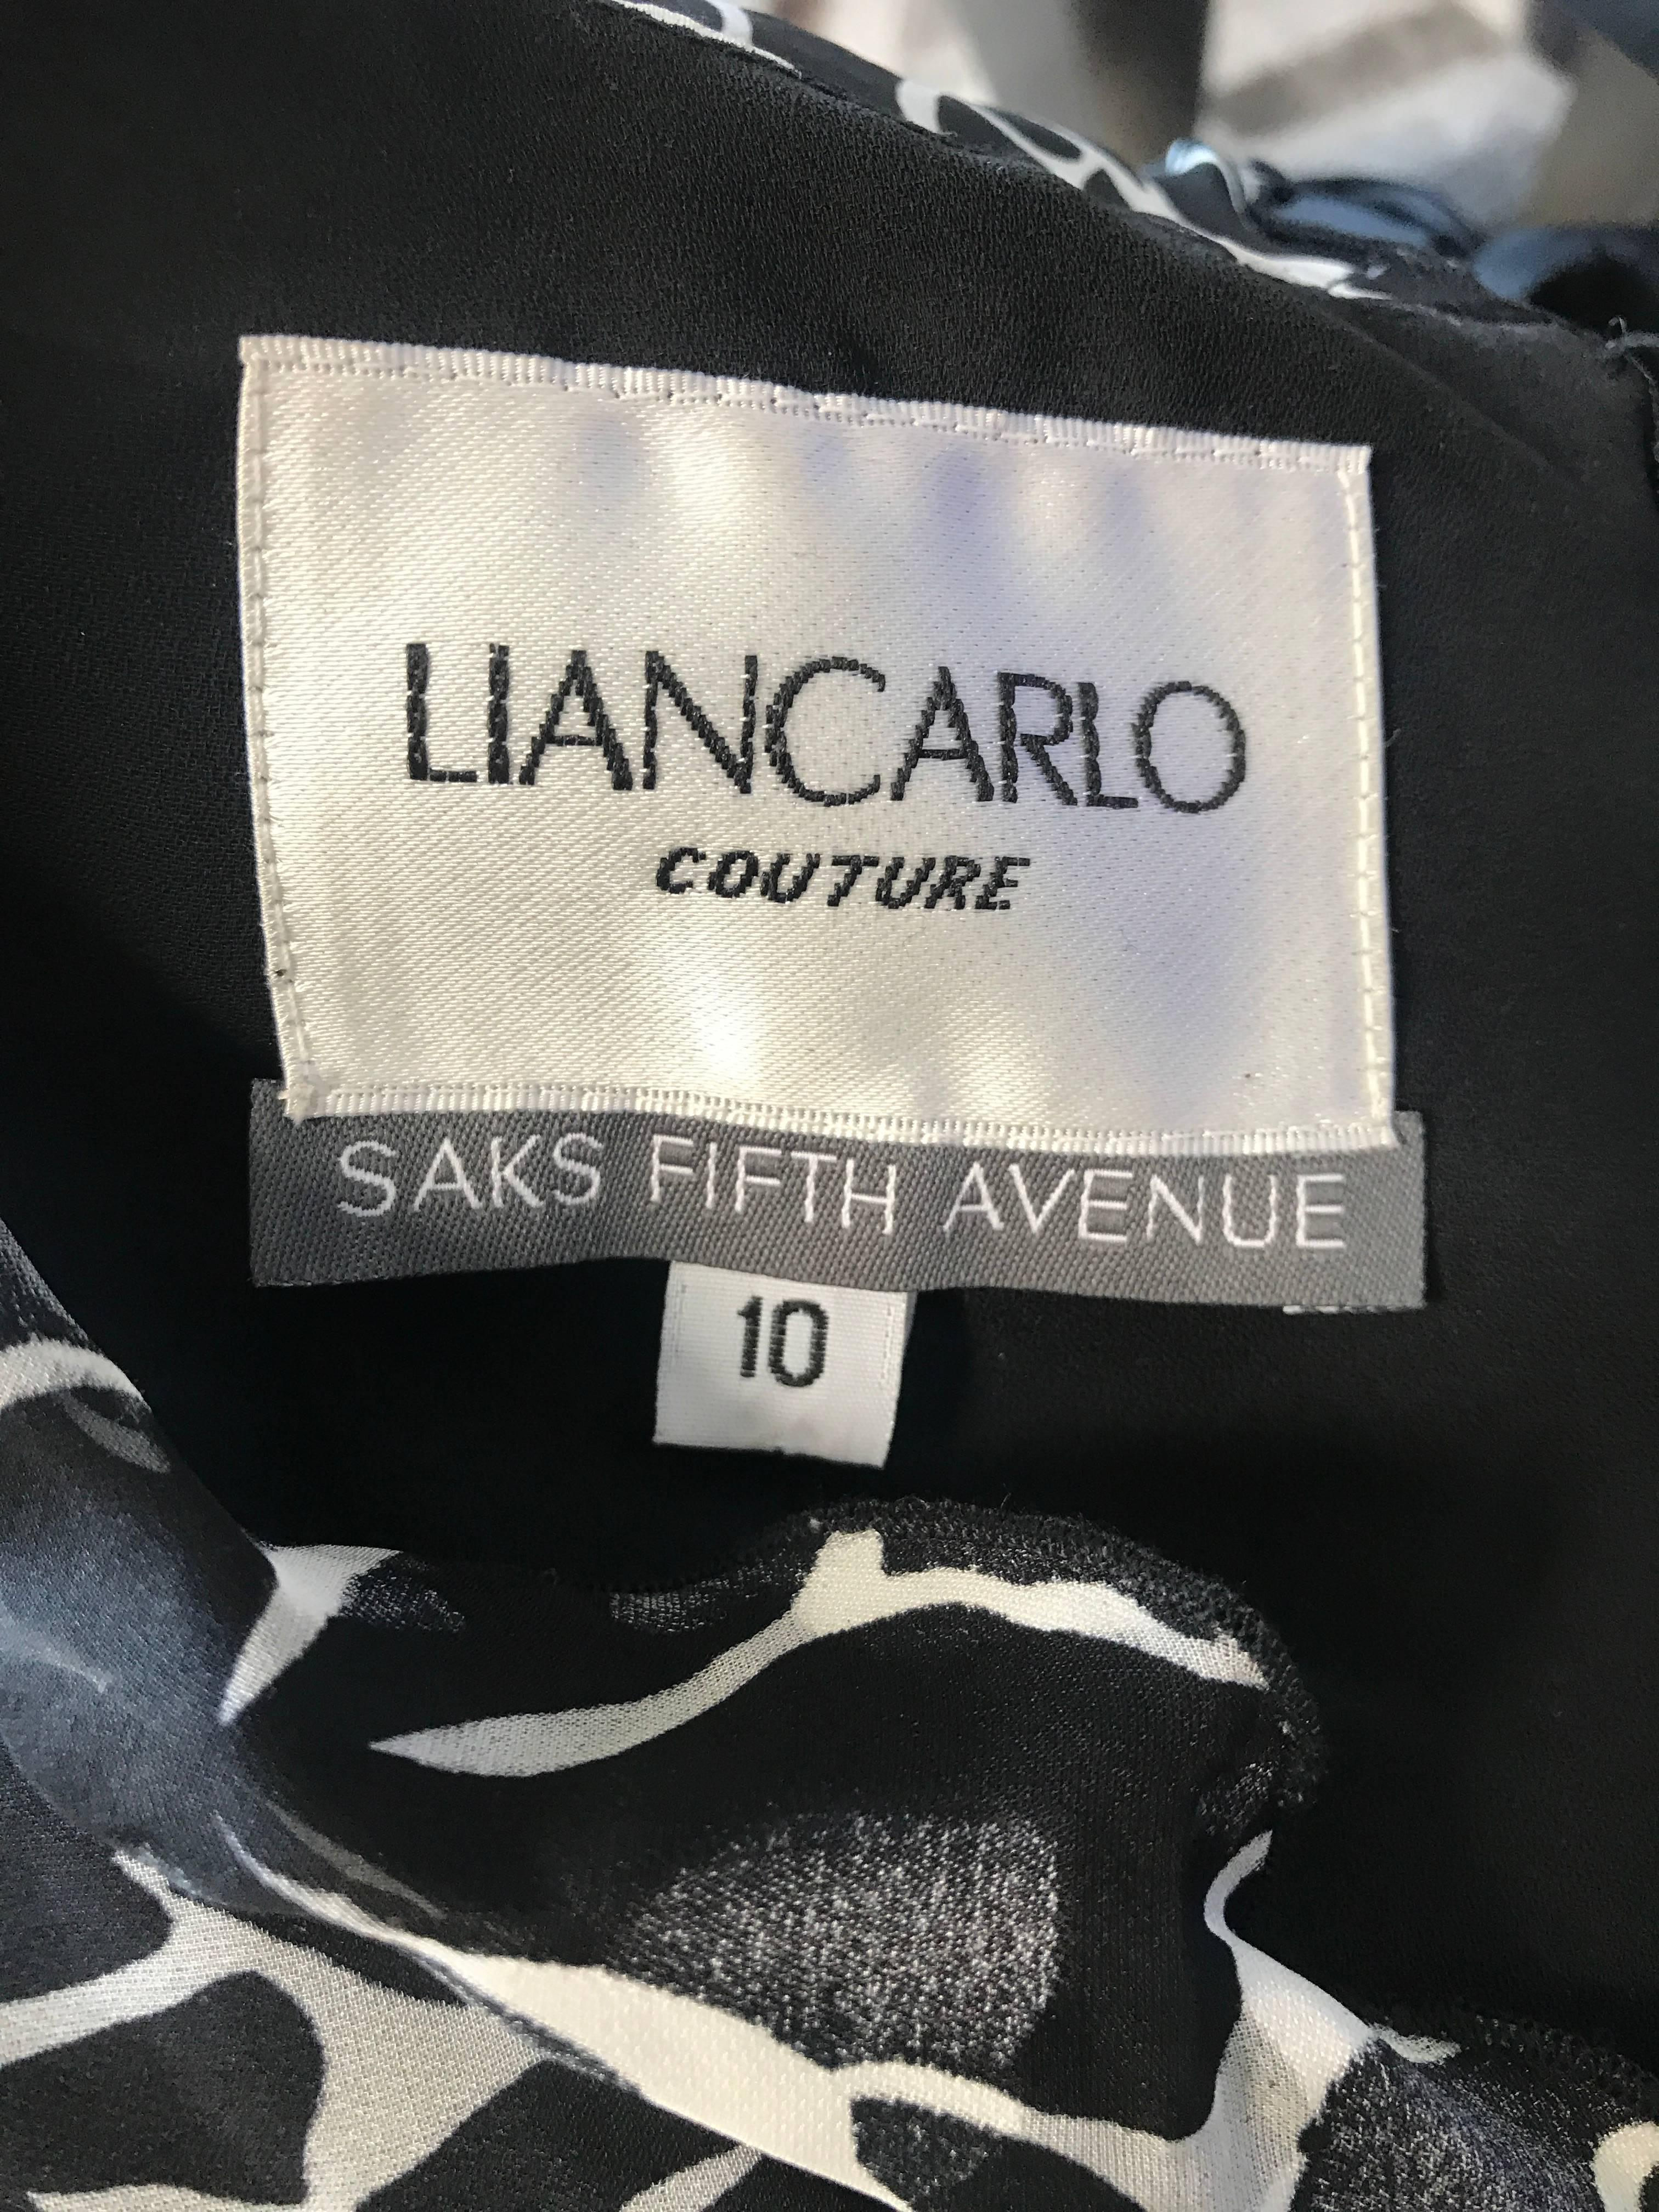 1990s Liancarlo Couture Size 10 Saks 5th Ave Black and White Vintage Silk Dress 5